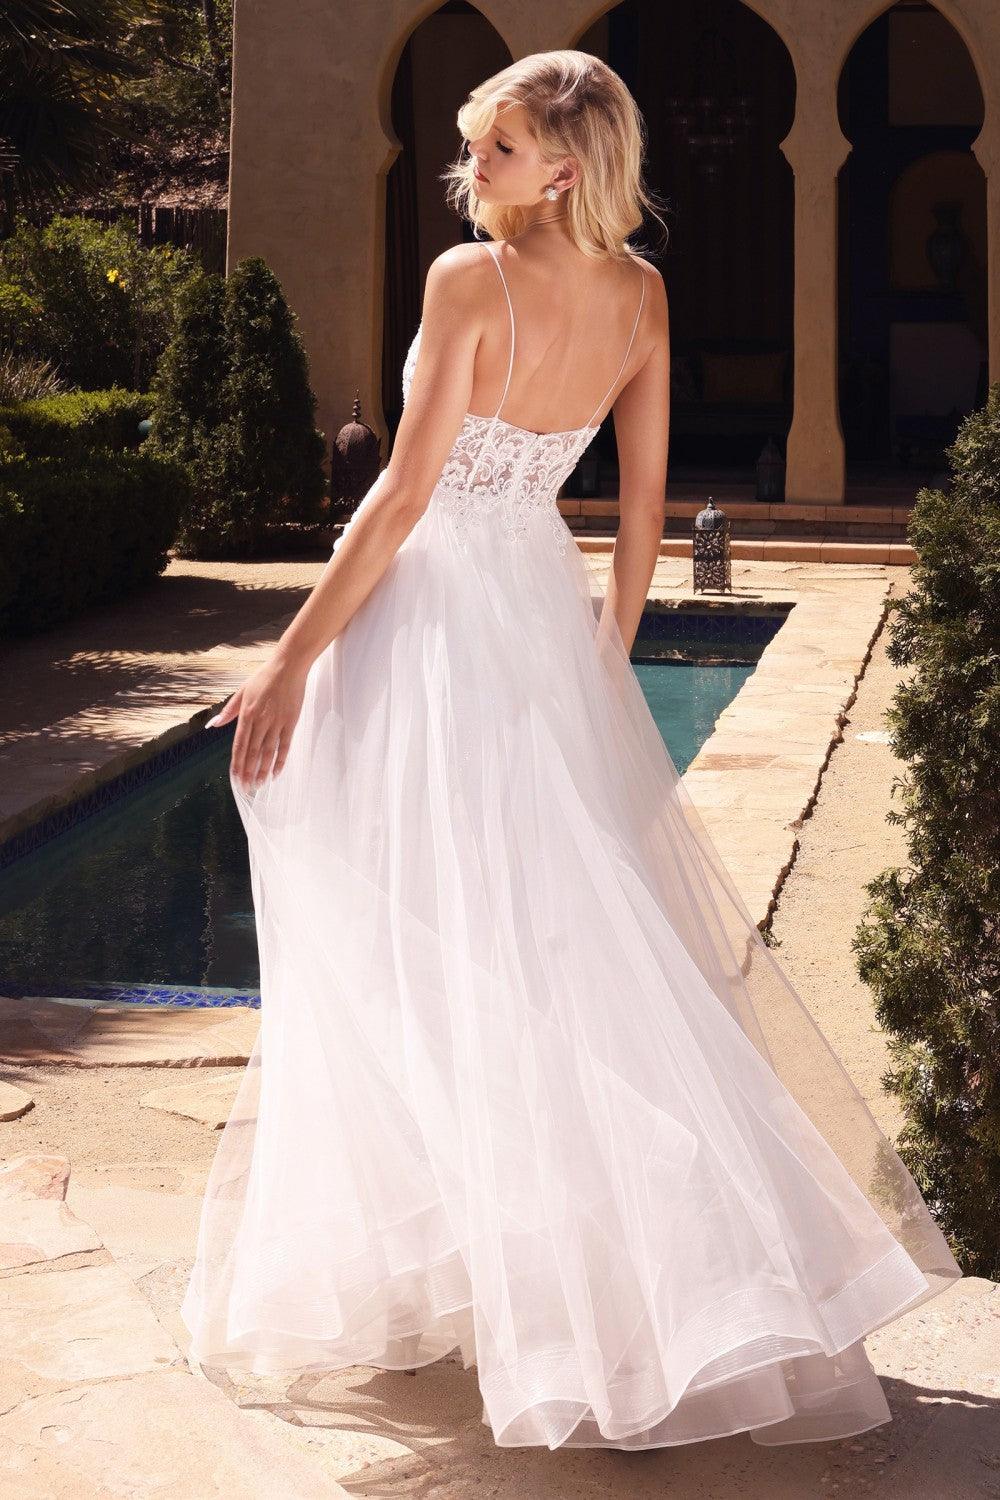 Long White Wedding Dress - The Dress Outlet